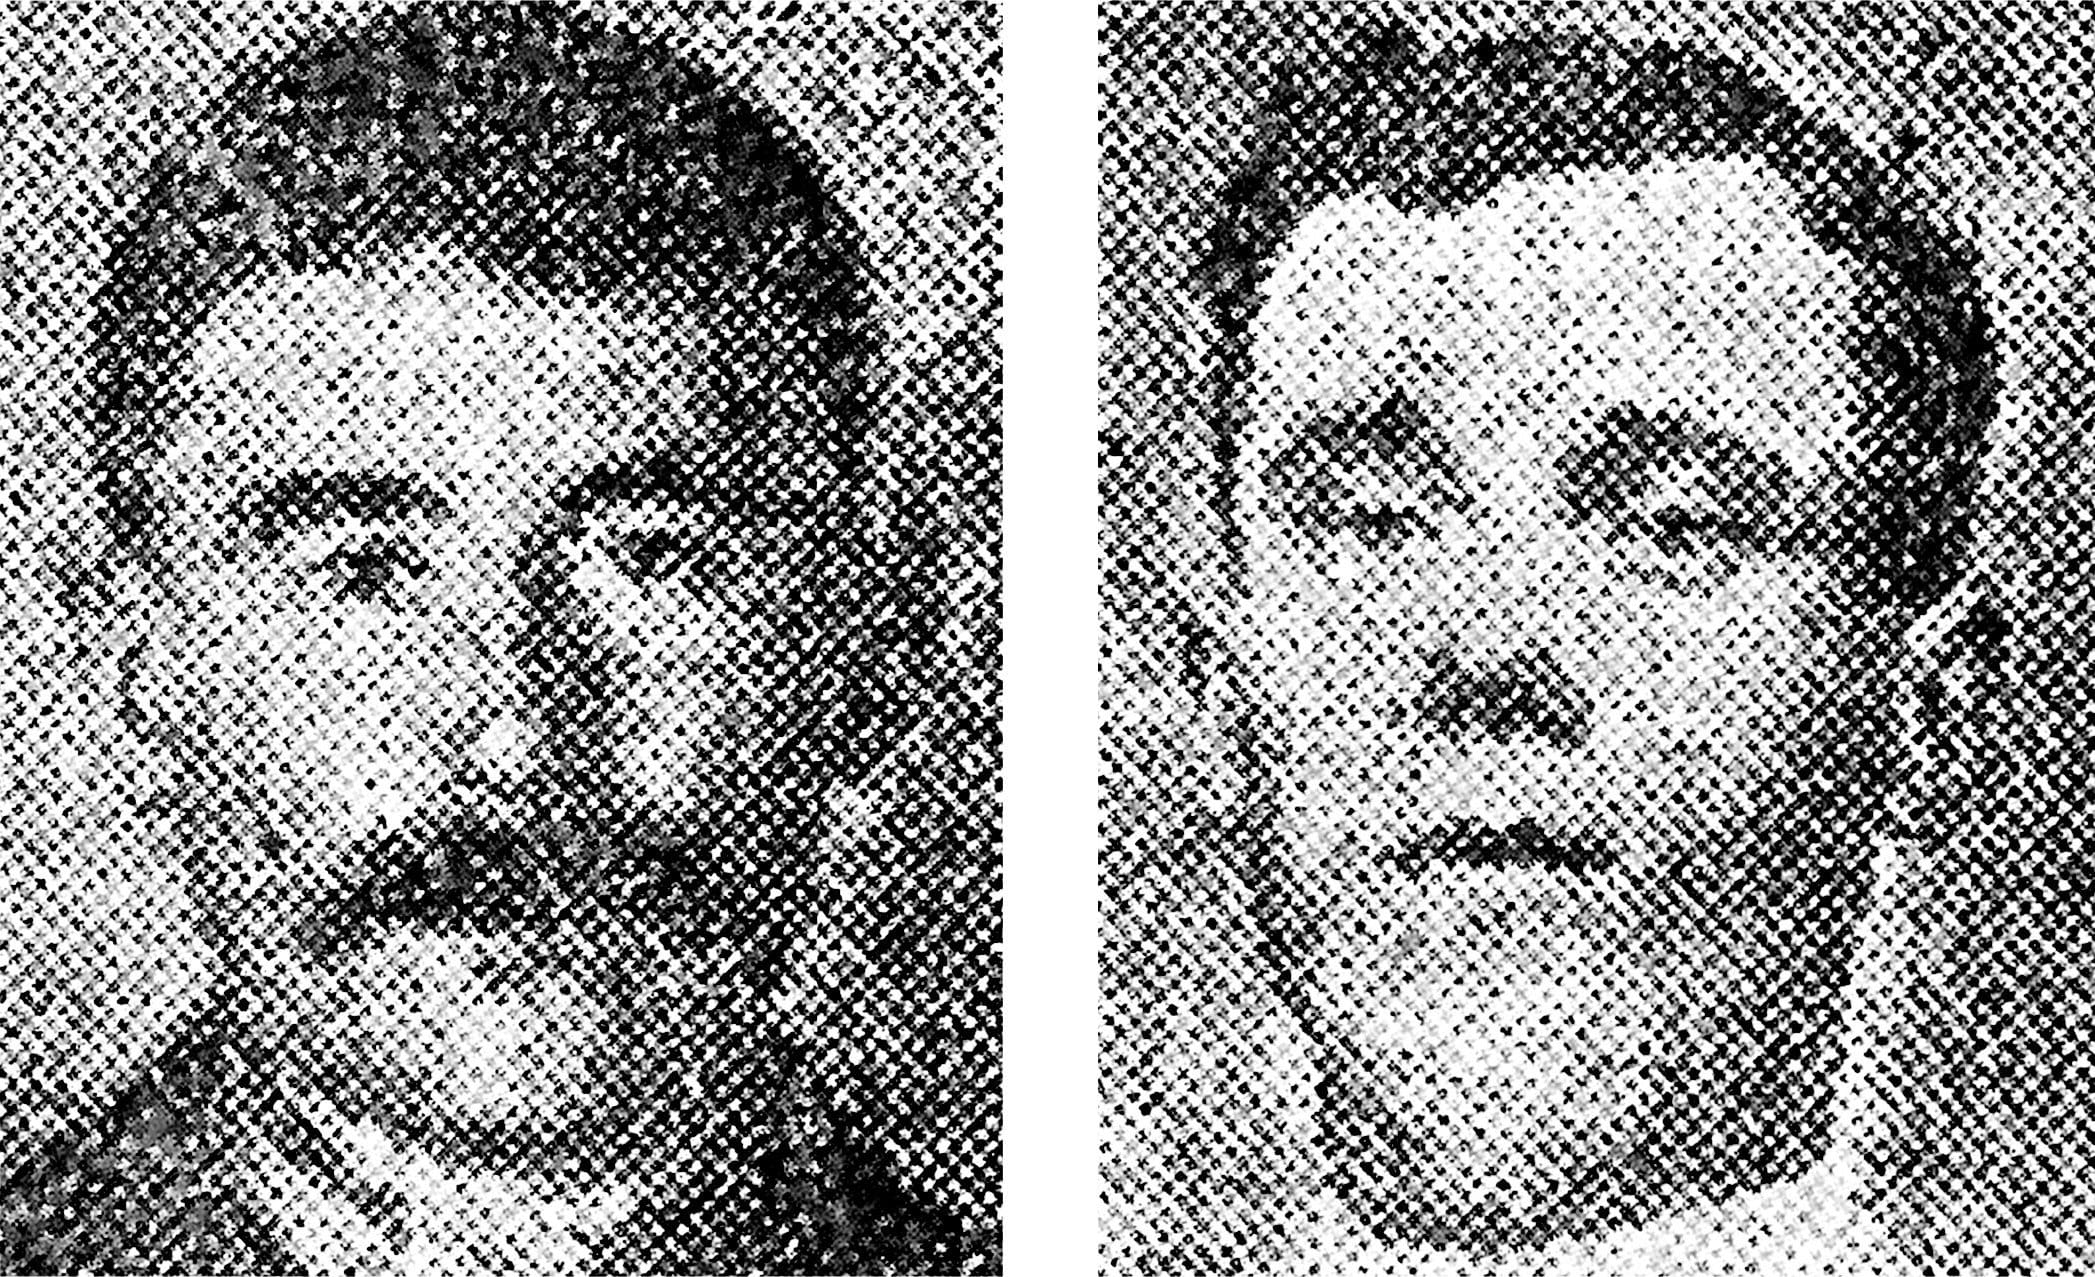 Portraits of Privates Donald and Neil McNeill 